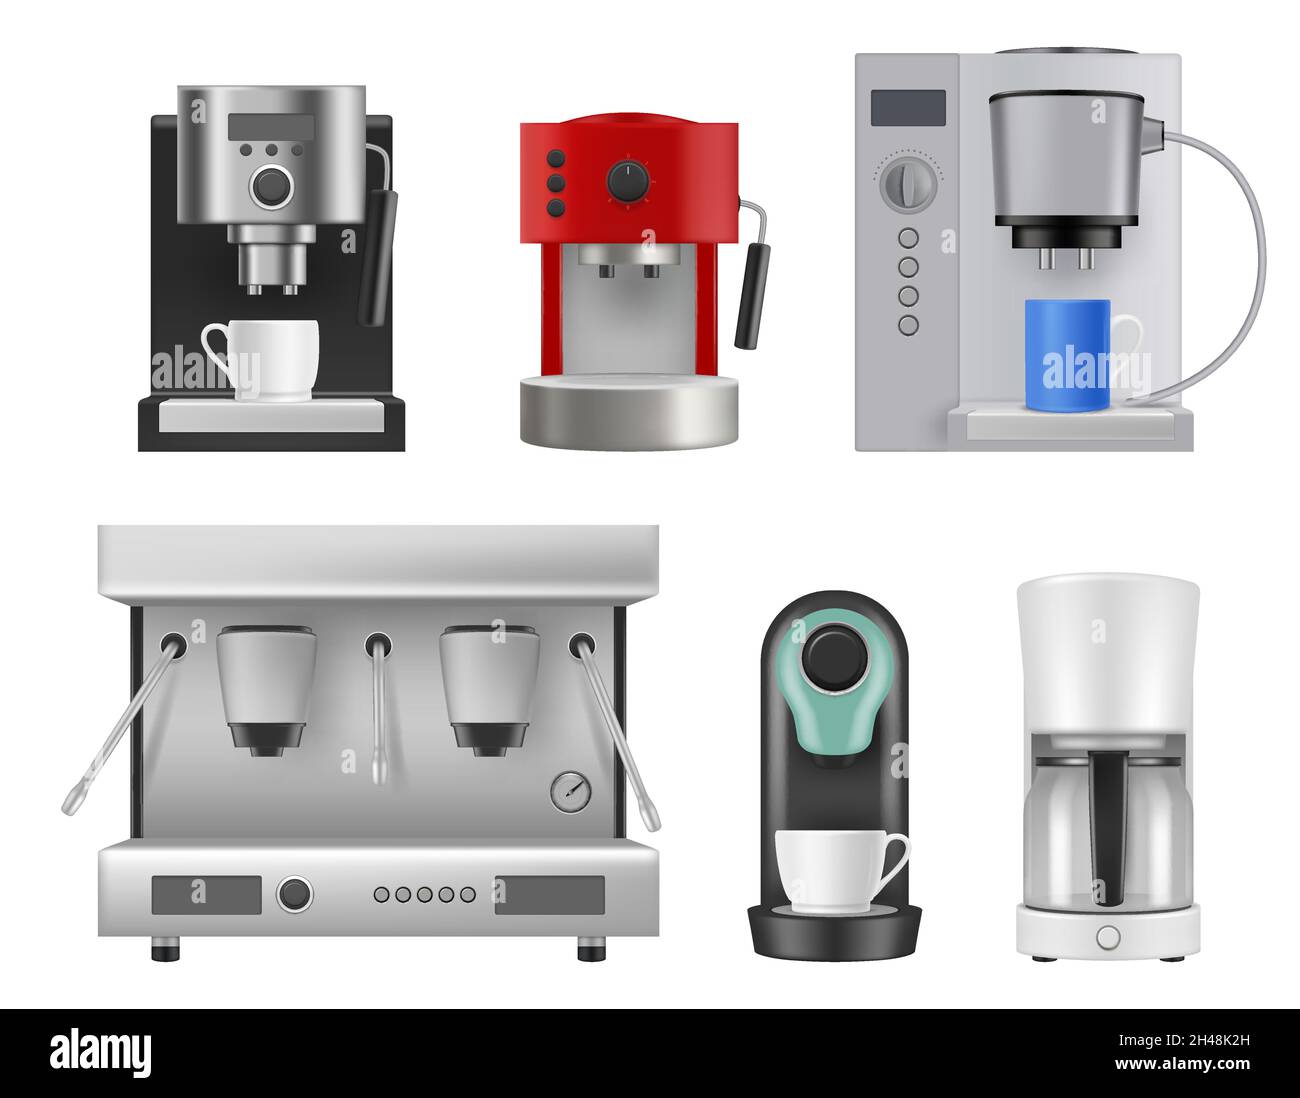 https://c8.alamy.com/comp/2H48K2H/coffee-machines-kitchen-items-for-preparing-hot-beverage-drinks-cappuchino-and-espresso-liquid-products-decent-vector-realistic-set-isolated-2H48K2H.jpg